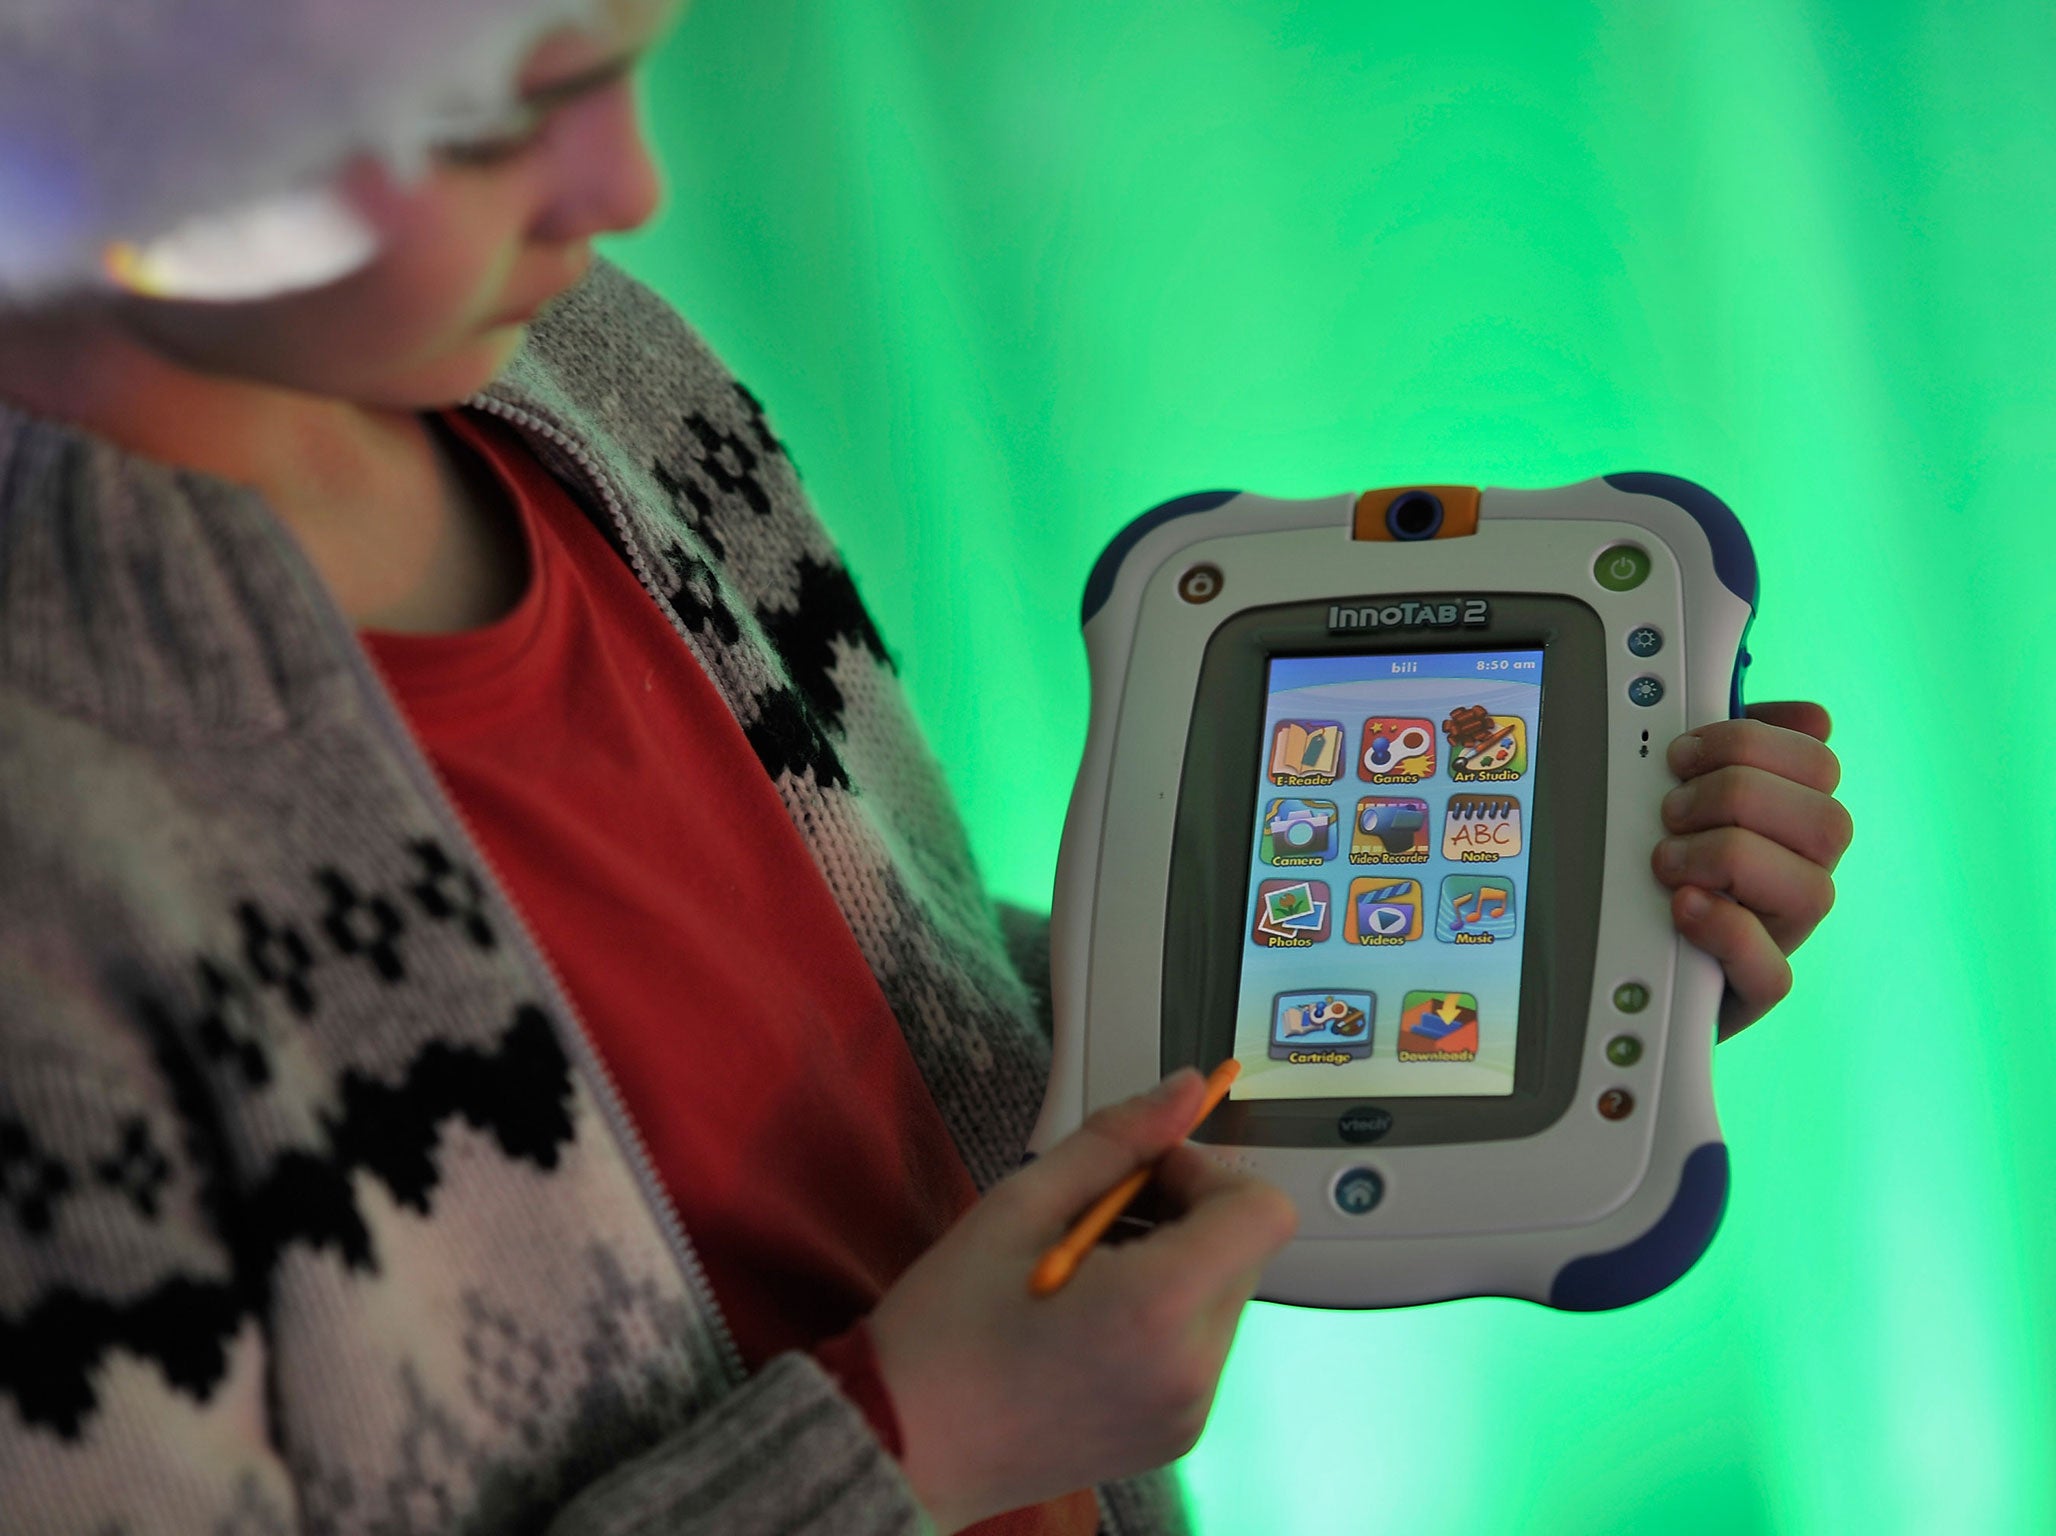 The VTech InnoTab 2 at the launch of Dream Toys 2012 at St Mary's Church on October 31, 2012 in London, England